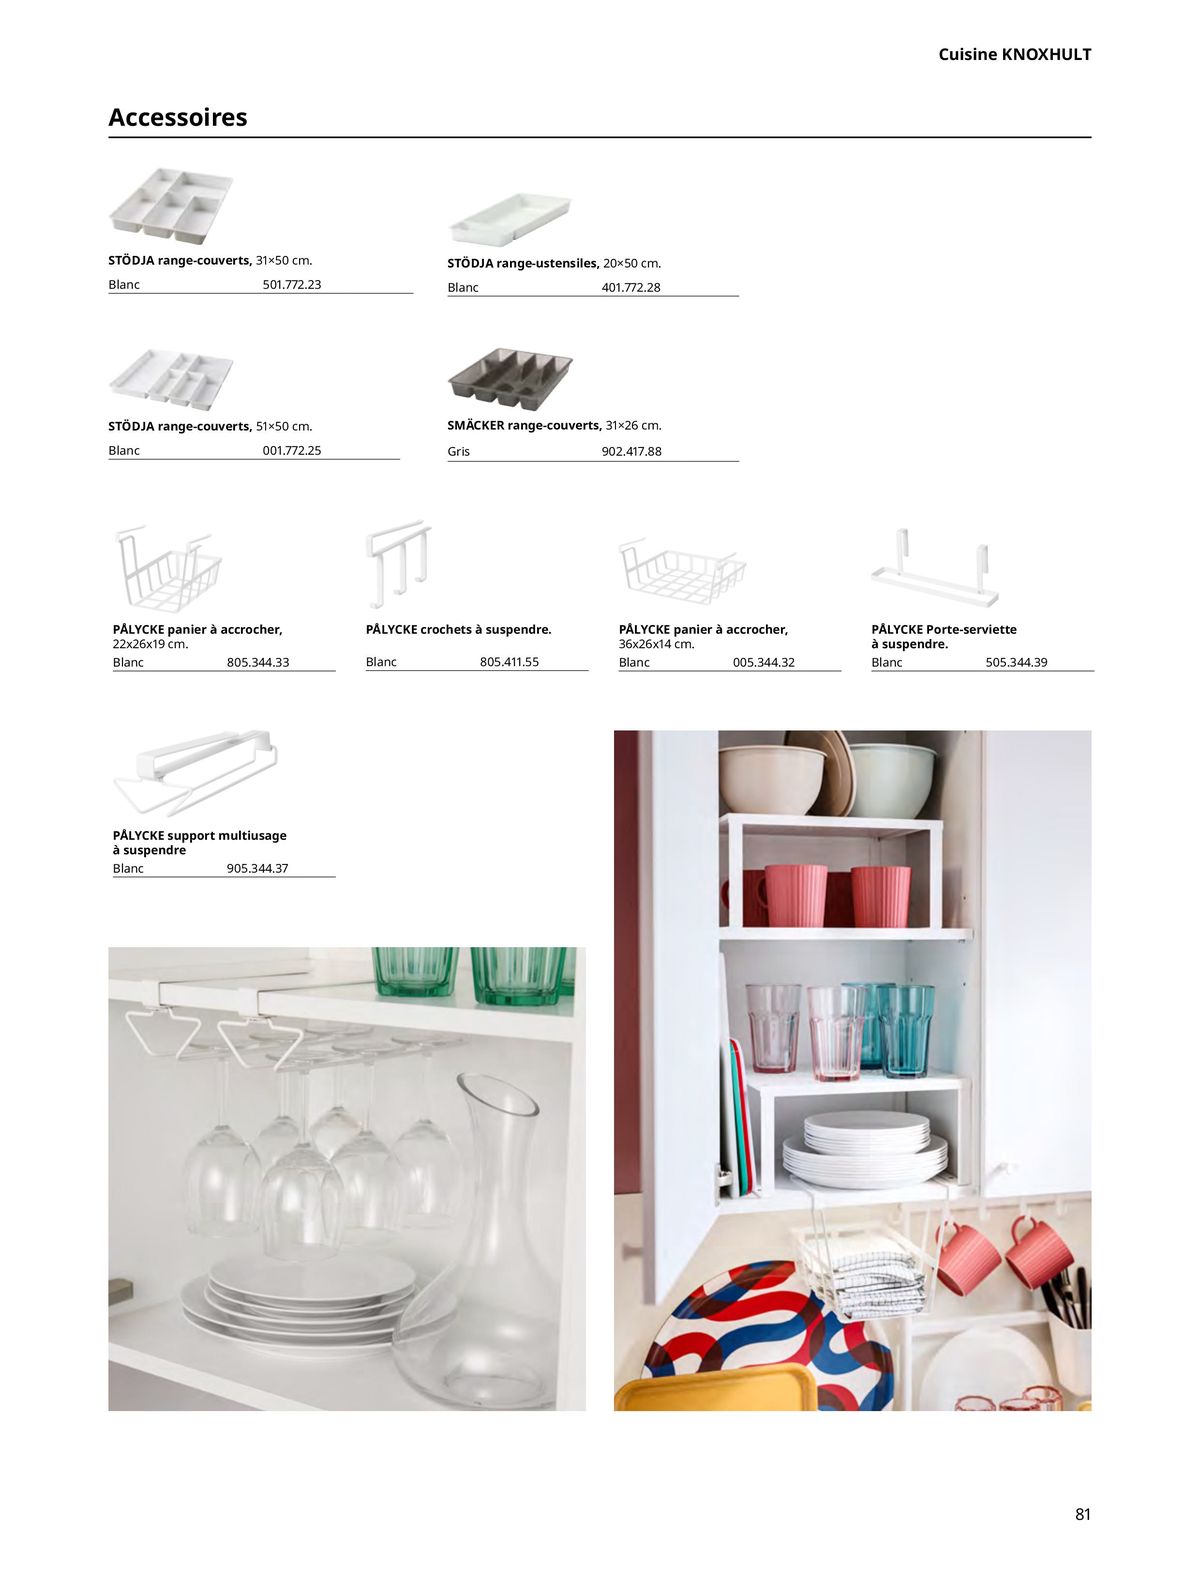 Catalogue IKEA CUISINES, page 00081